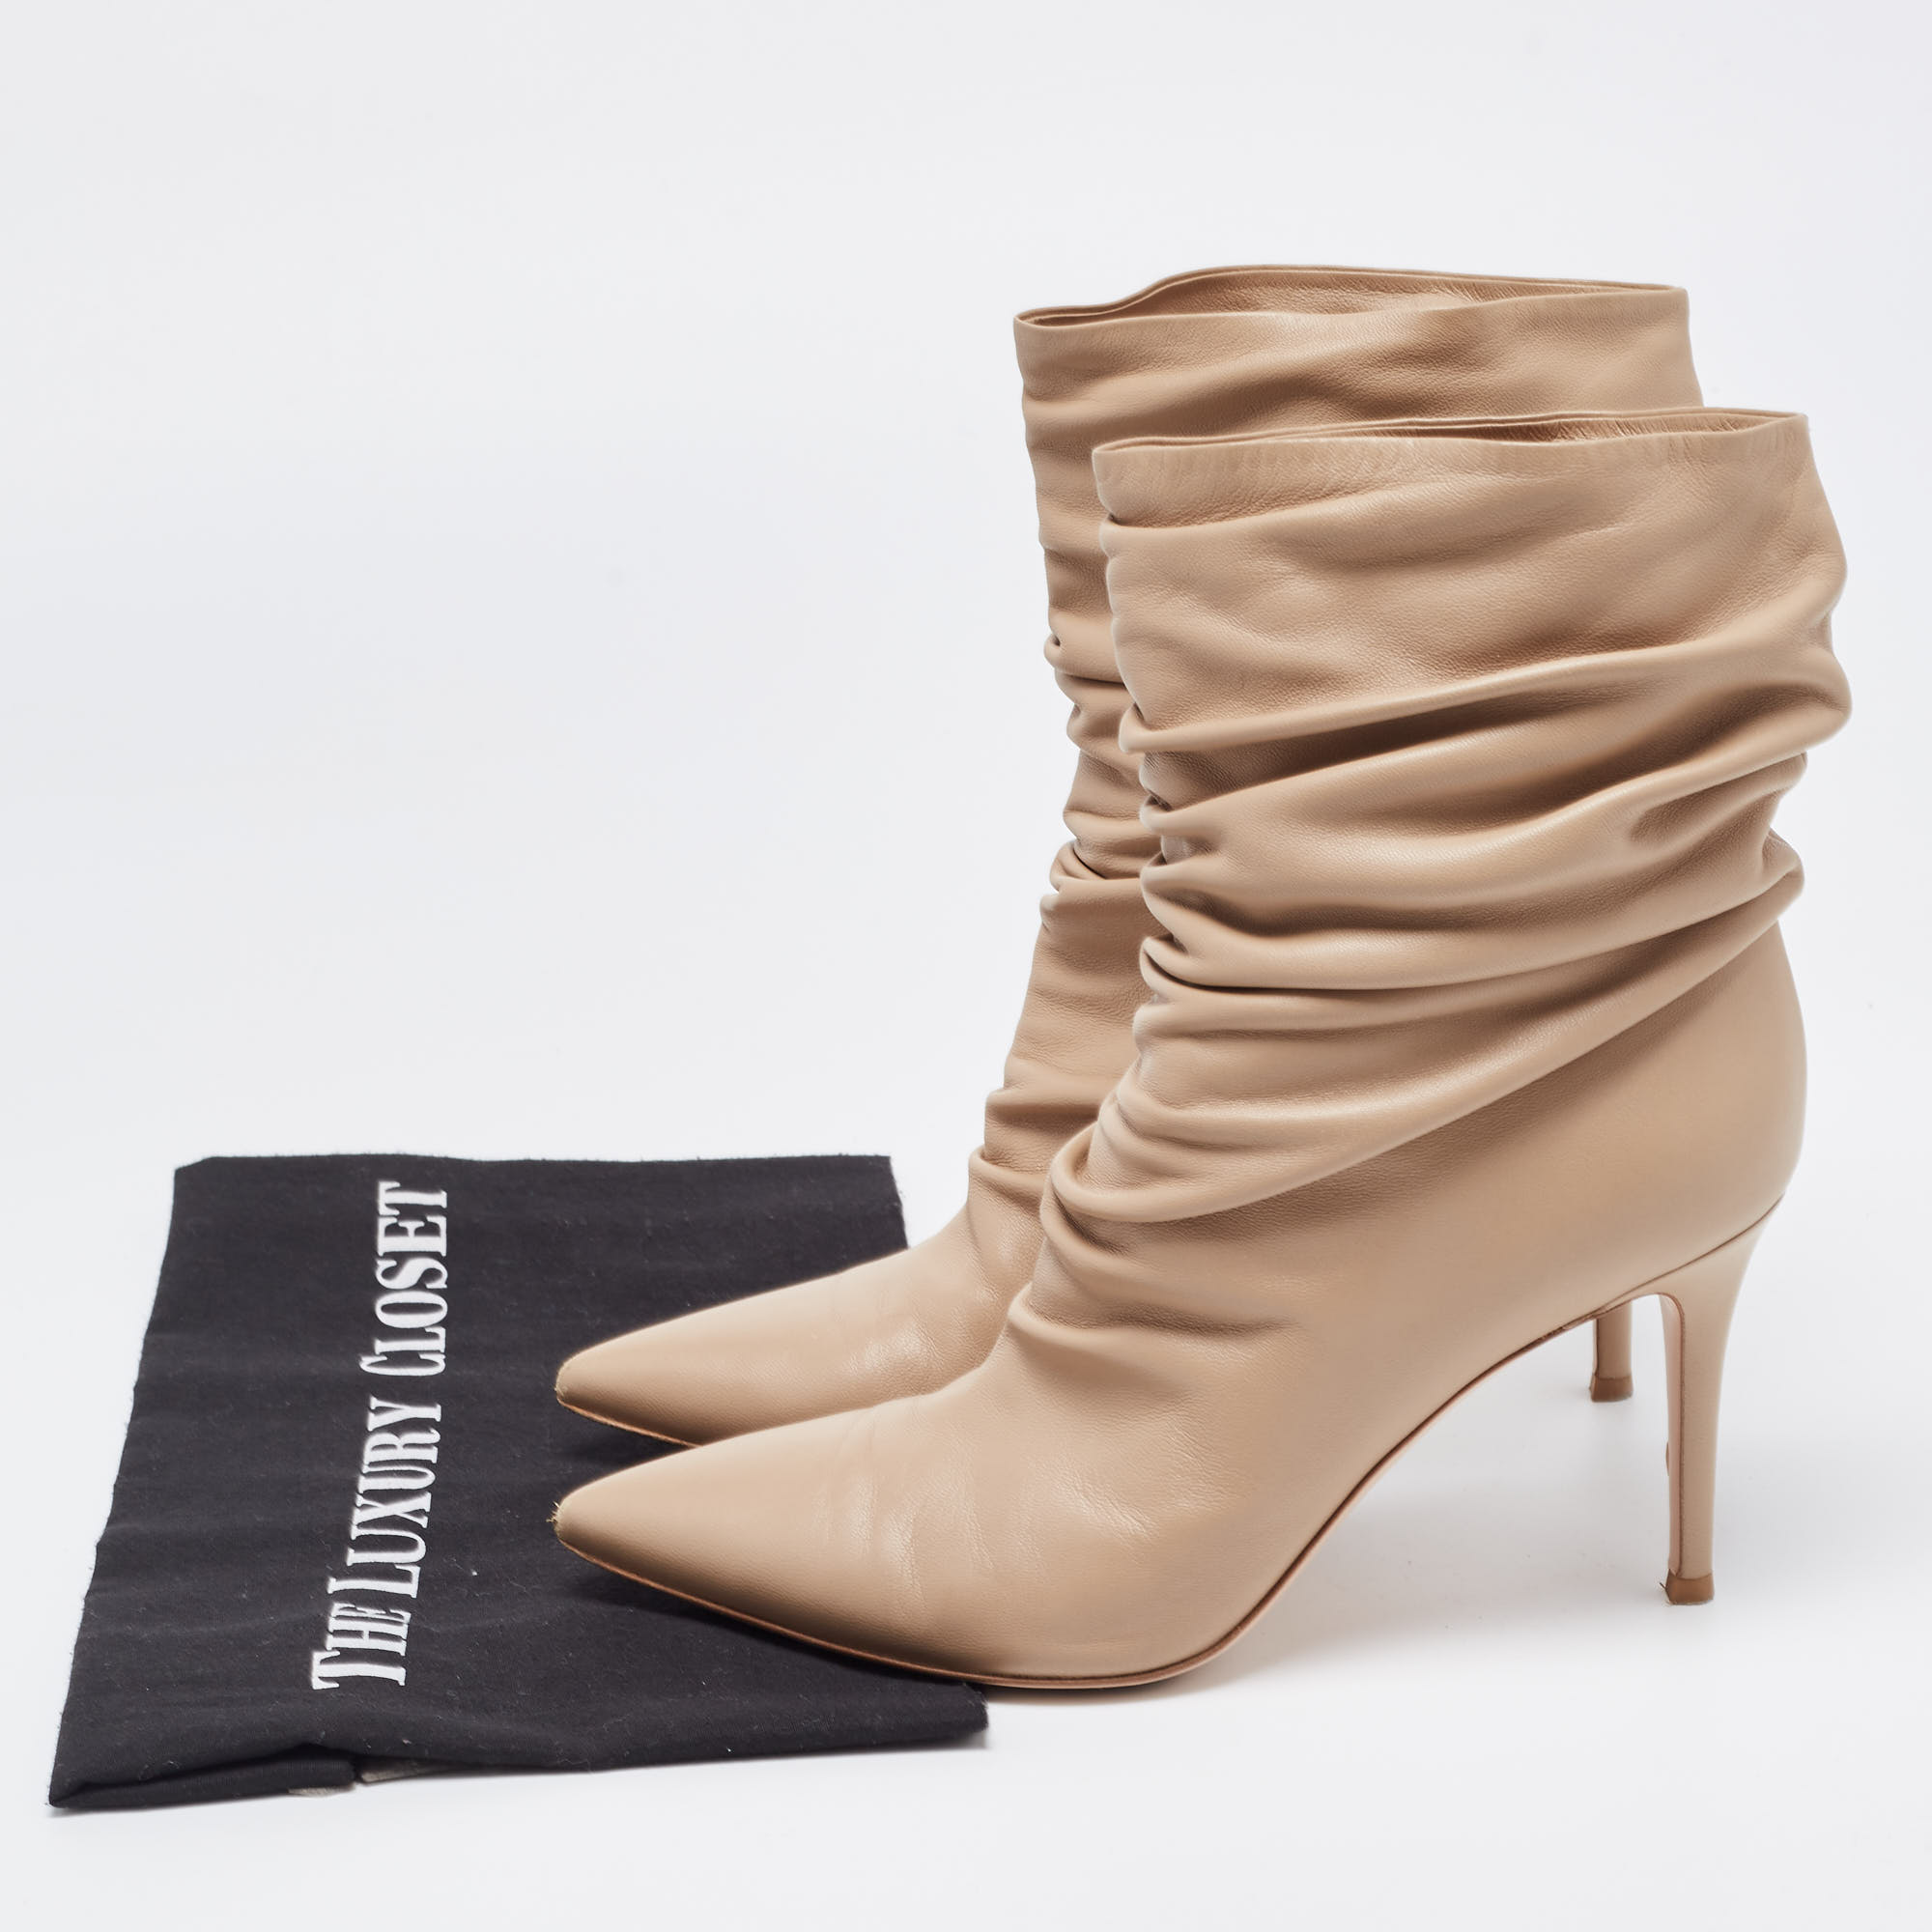 Gianvito Rossi Beige Leather Ruched Ankle Boots Size 39